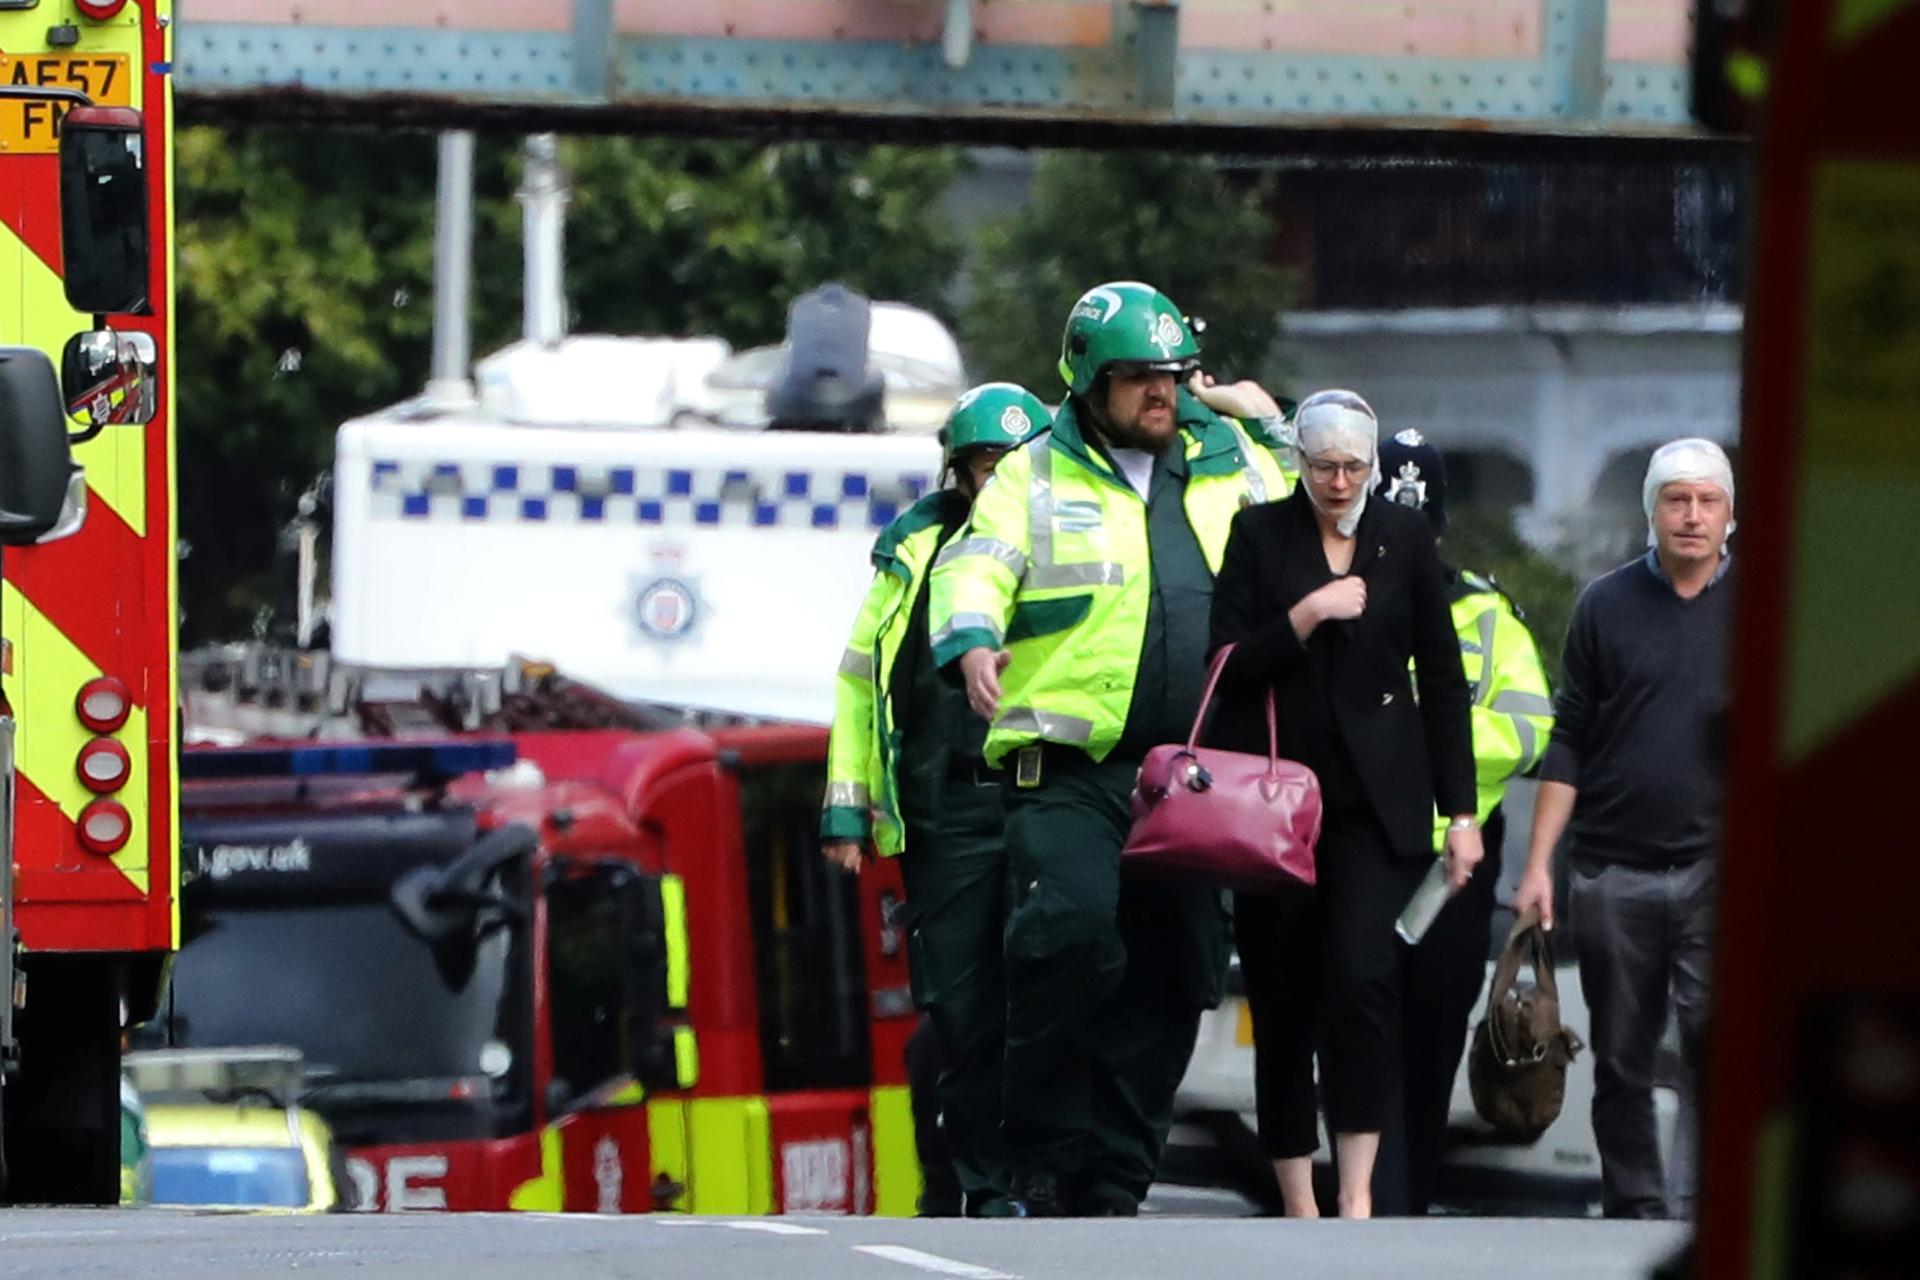 An injured woman is led away after an incident at Parsons Green underground station